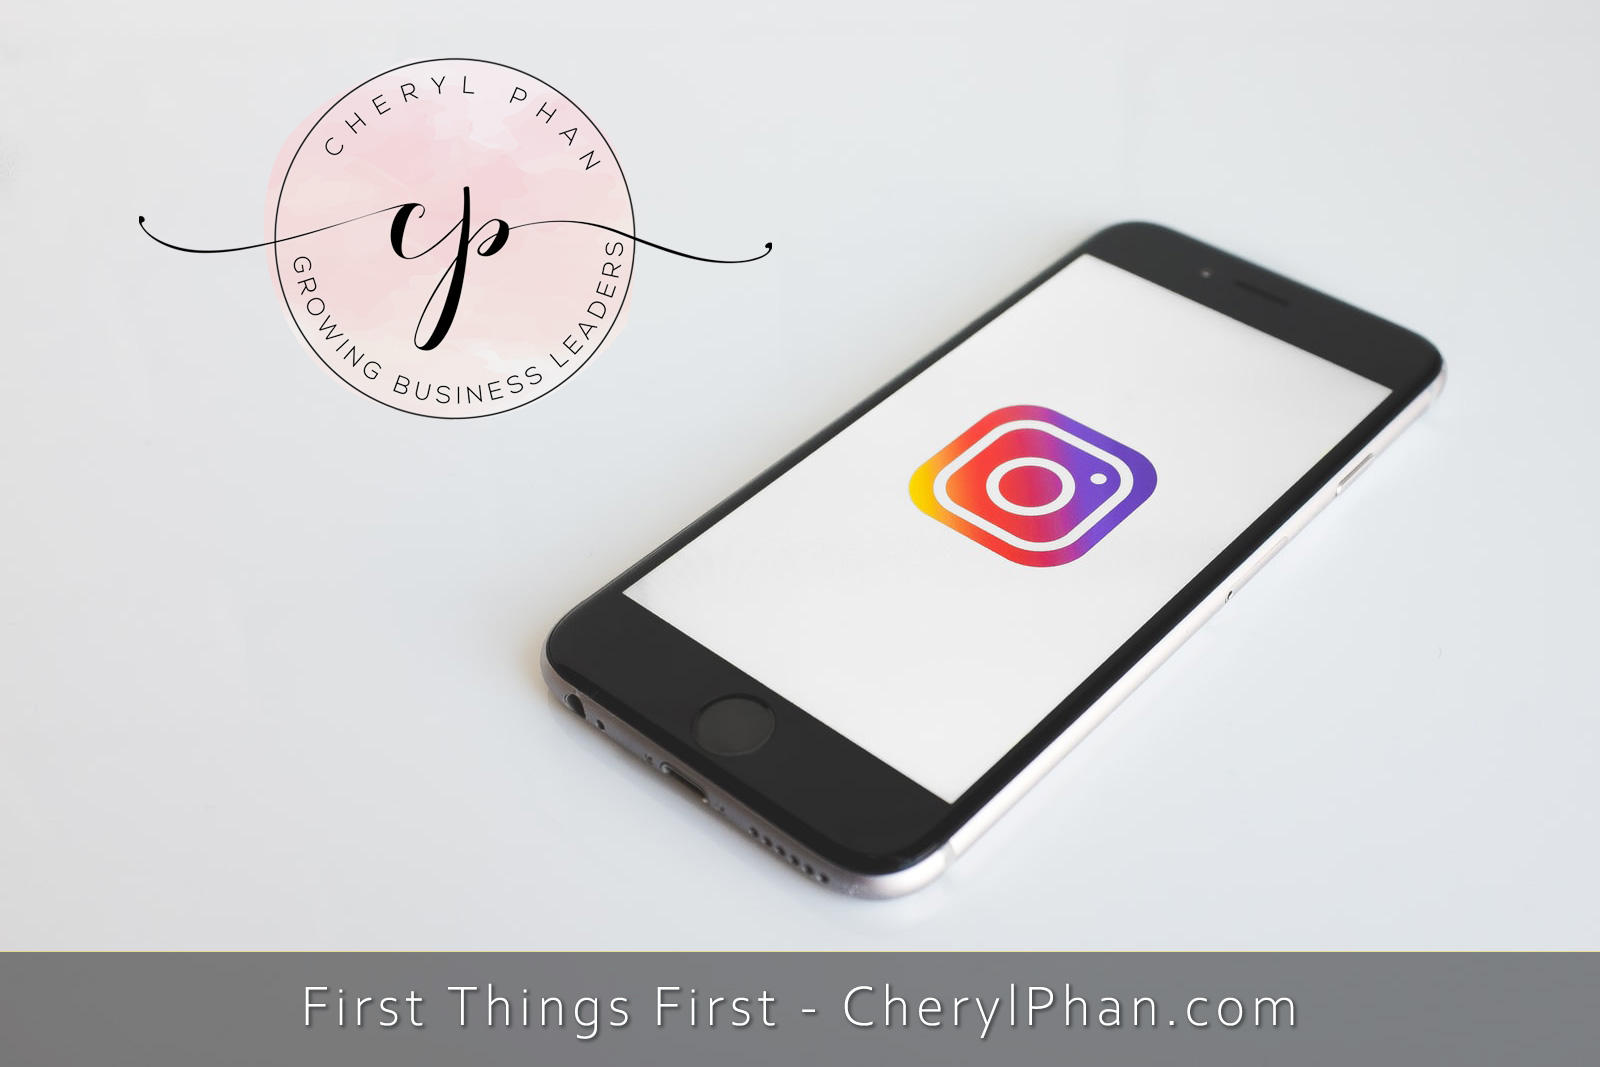 20-First-Things-First-Video-Courses-Instagram-Sales-Cheryl-Phan